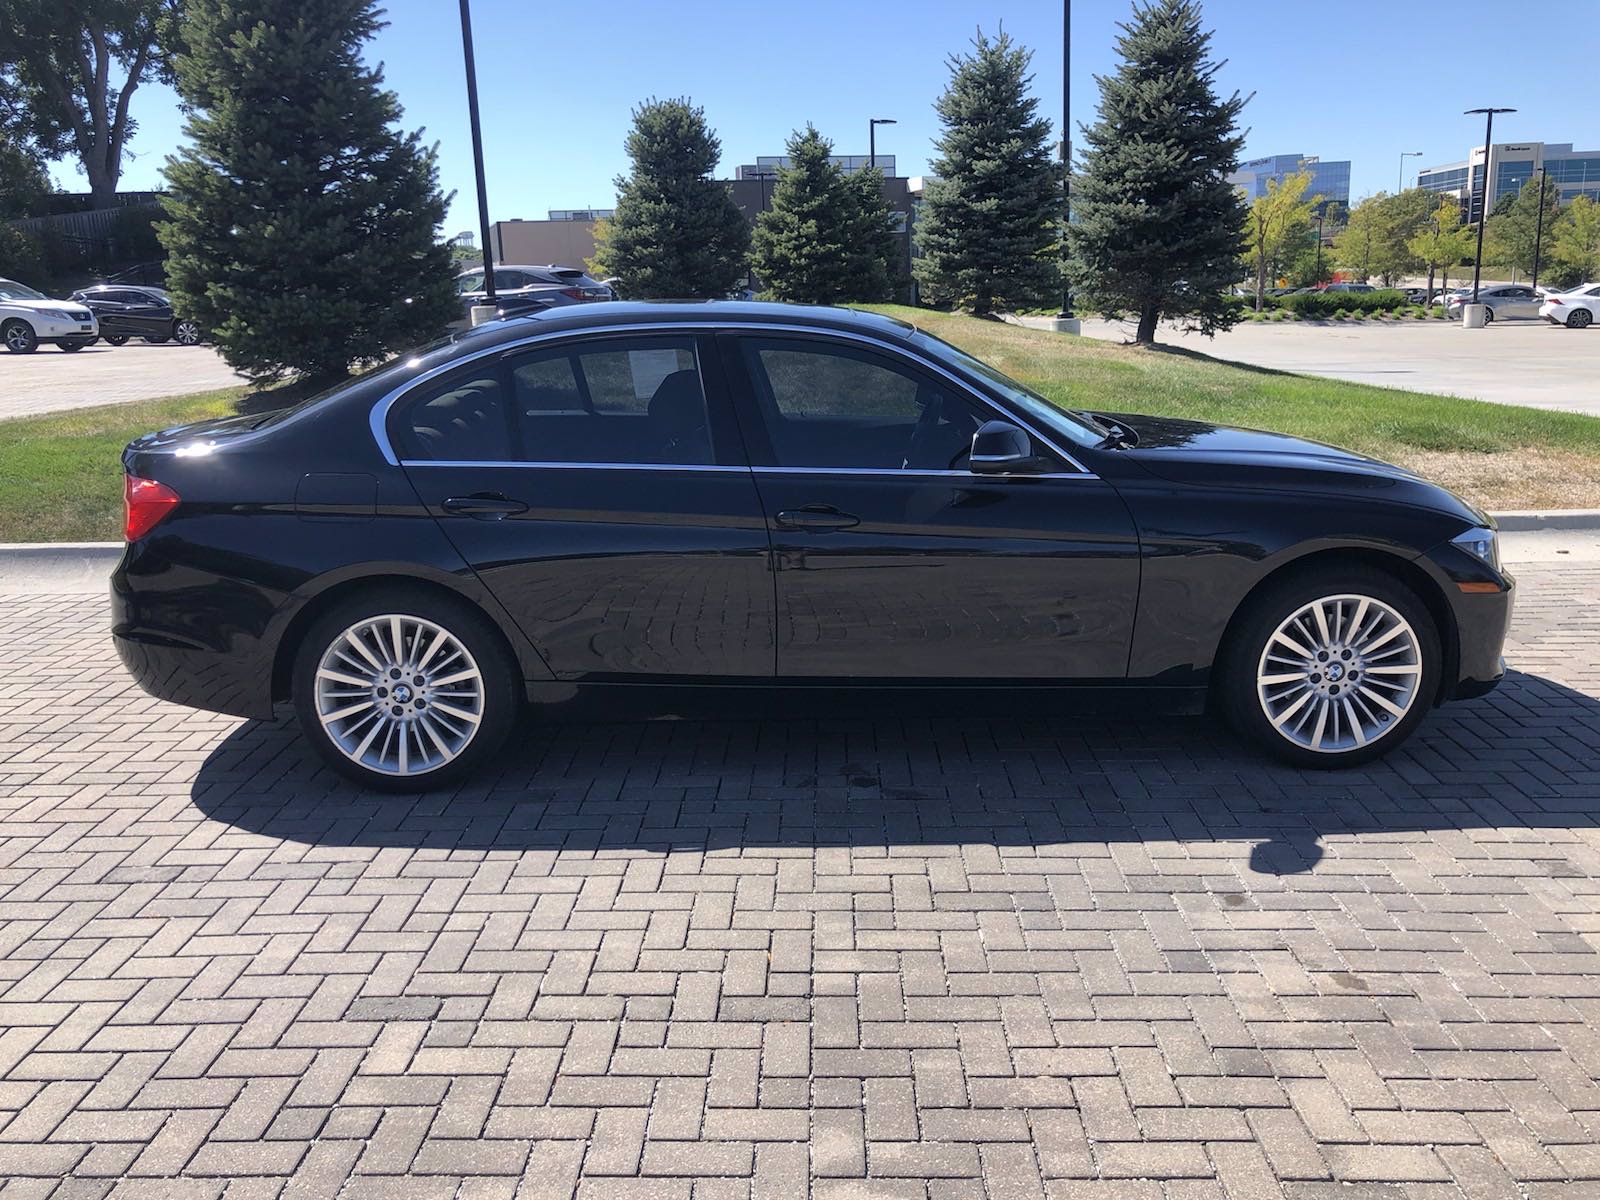 PreOwned 2015 BMW 328i xDRIVE 4DR SDN AWD/4WD,1 OWNE 4dr